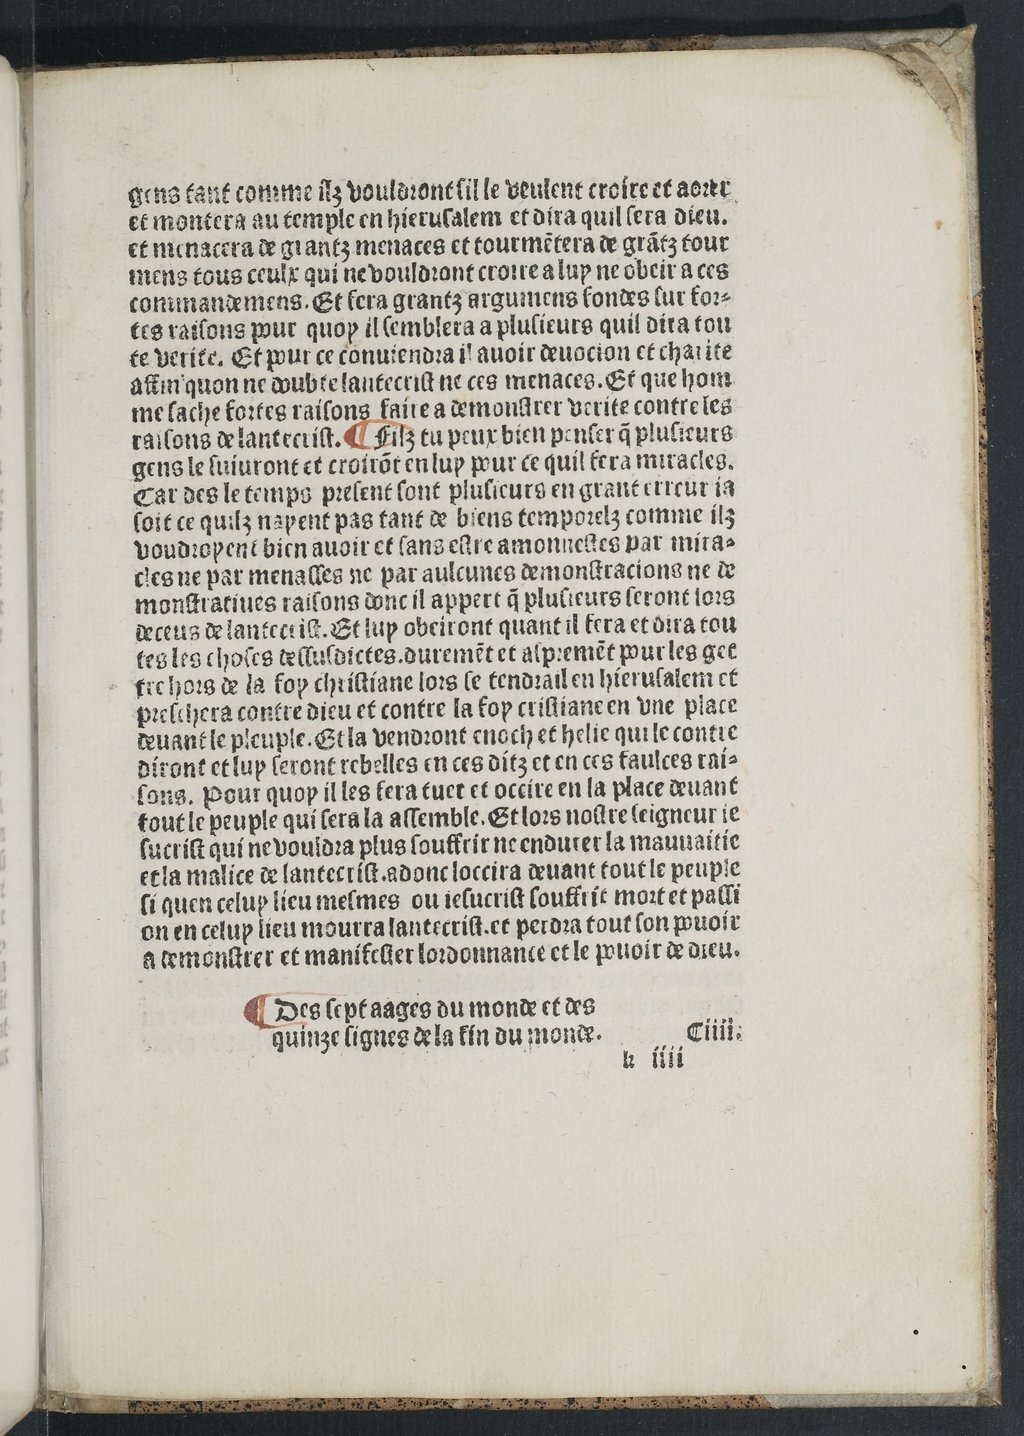 1482 [Antoine Caillaut] Trésor des humains BnF_Page_153.jpg